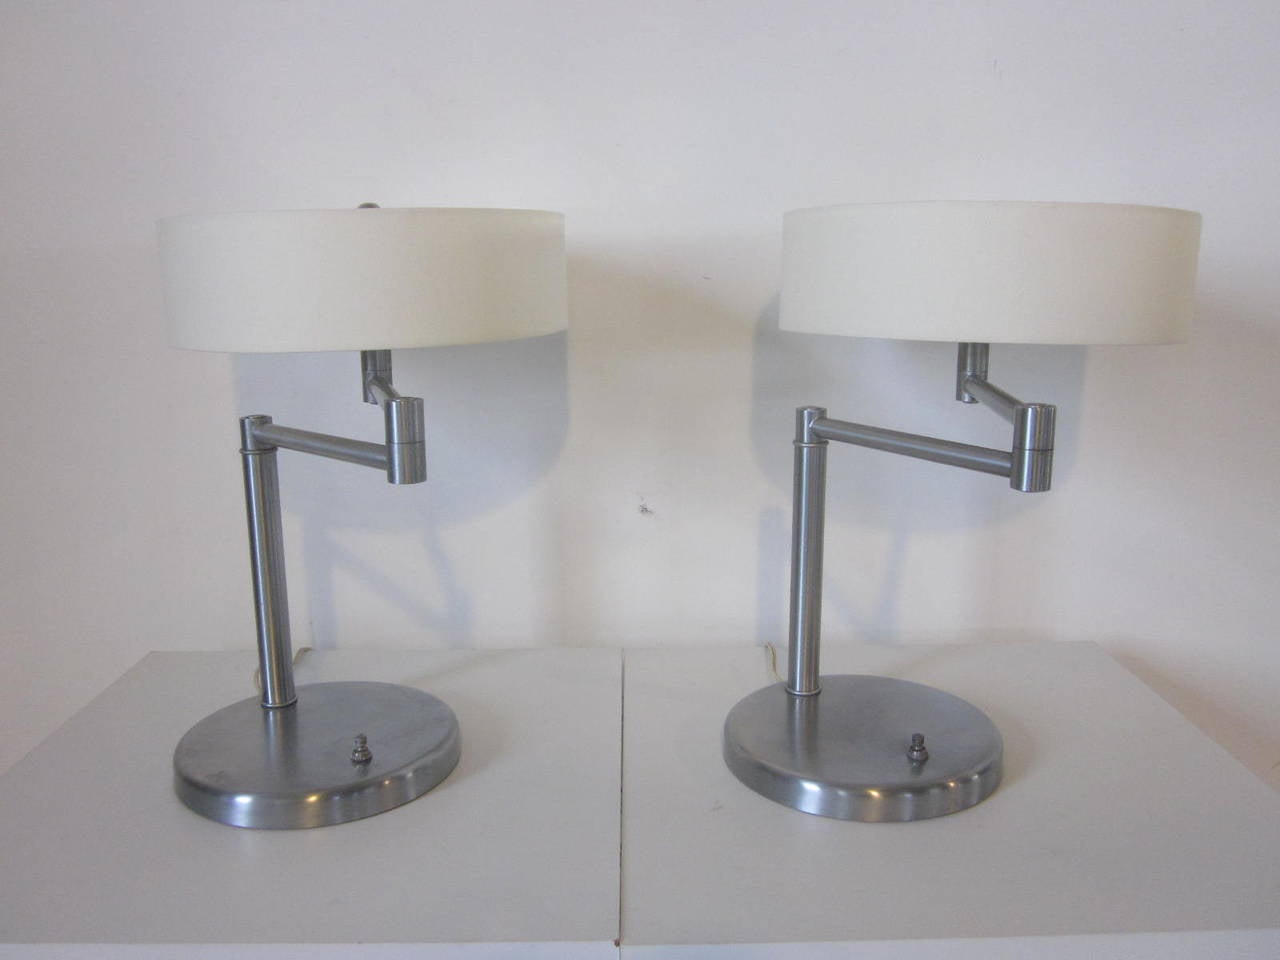 A pair of Nessen swing arm table lamps in brushed stainless steel with linen shades, opaque Lucite diffusers and stainless finials. Manufactured by the Nessen Lamp Company, NY.